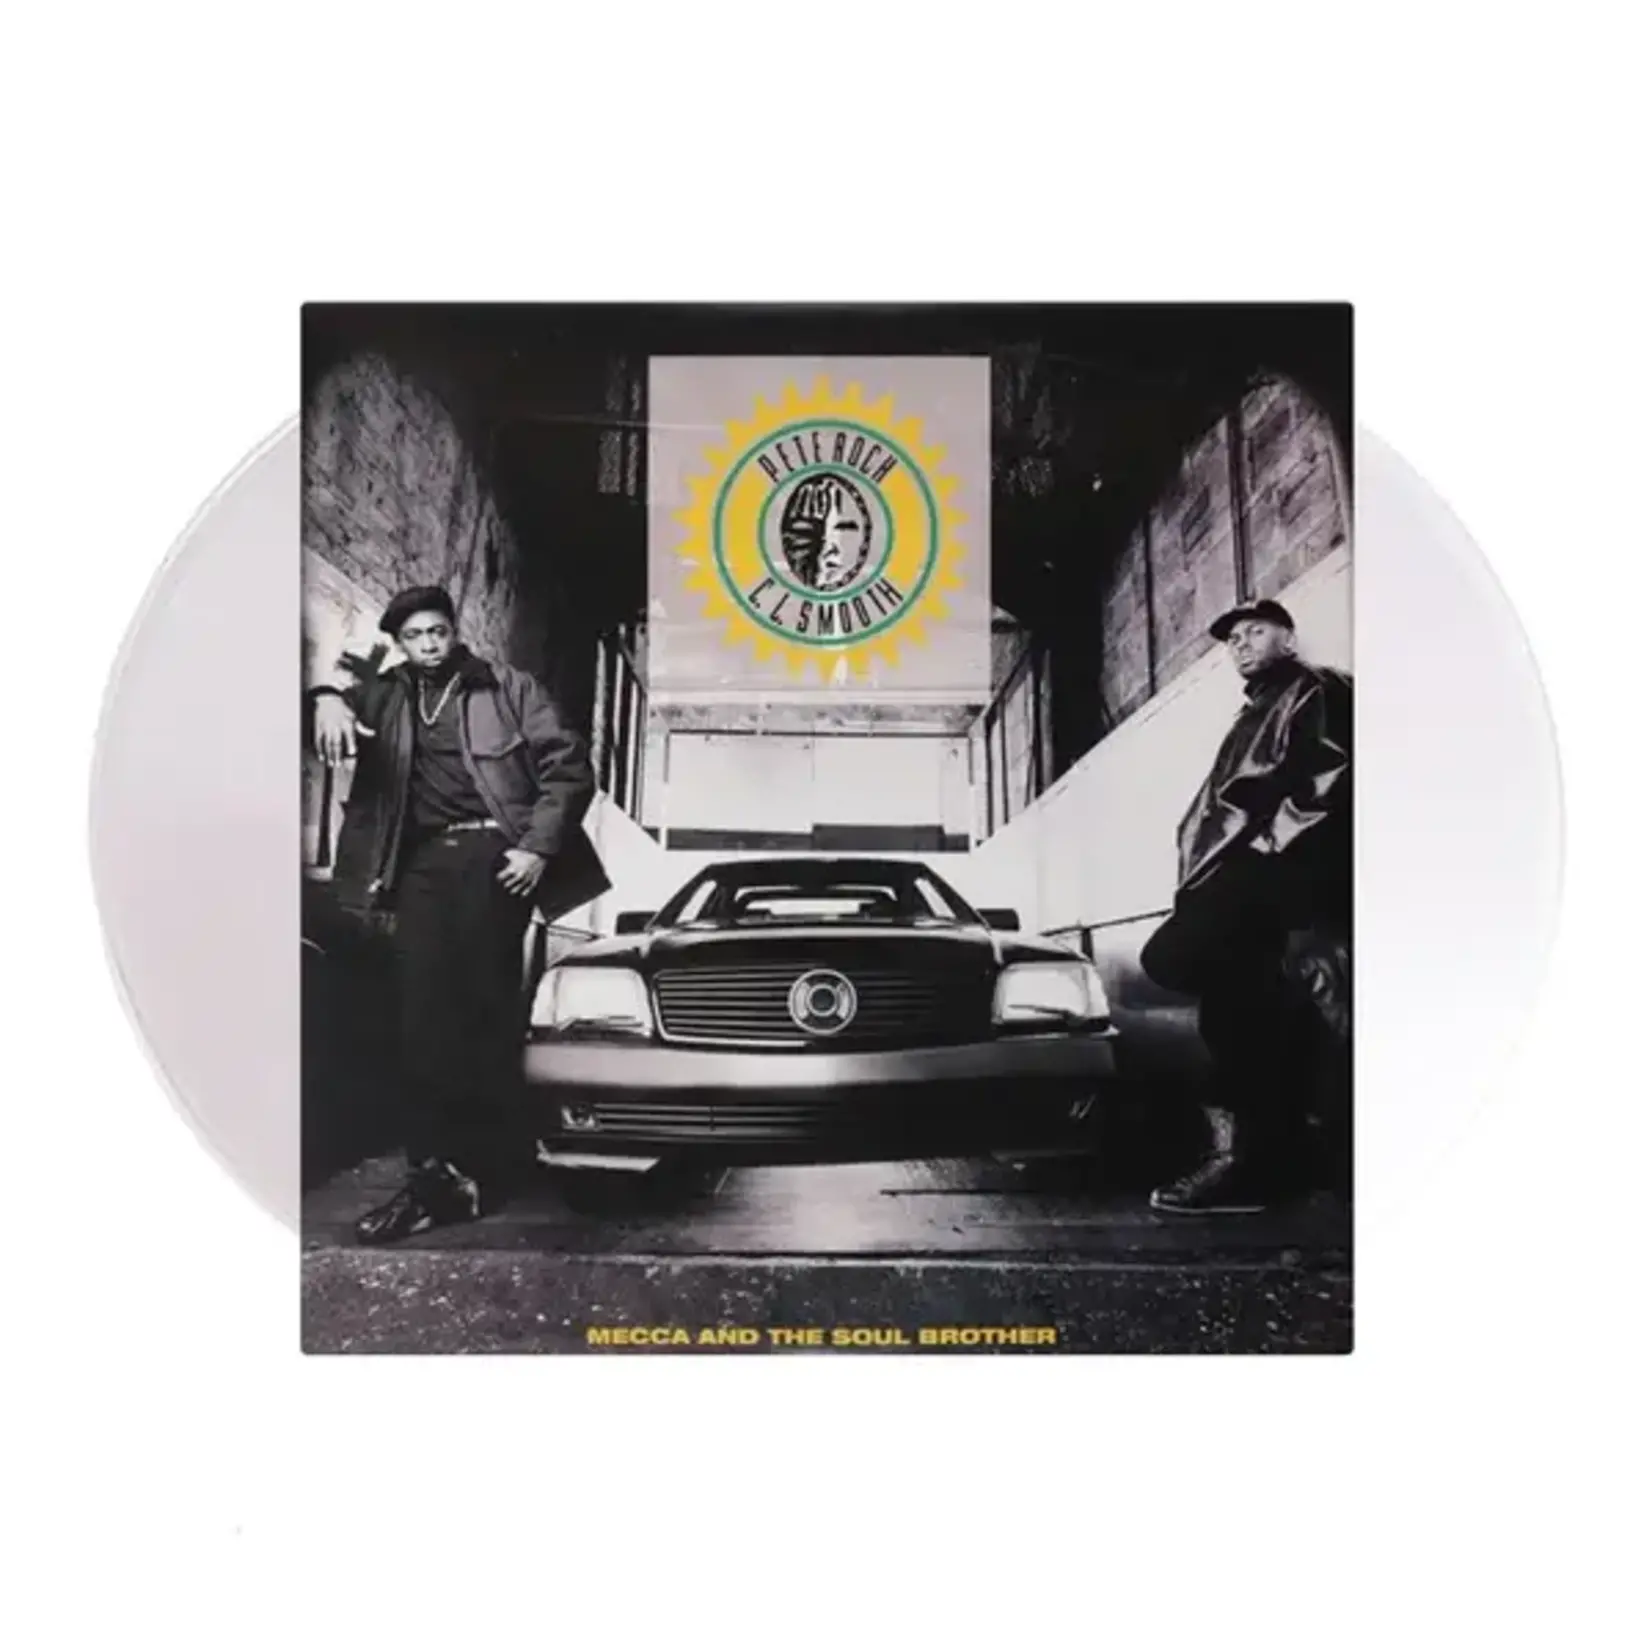 Pete Rock & C.L. Smooth - Mecca And The Soul Brother (Clear Vinyl) [2LP]